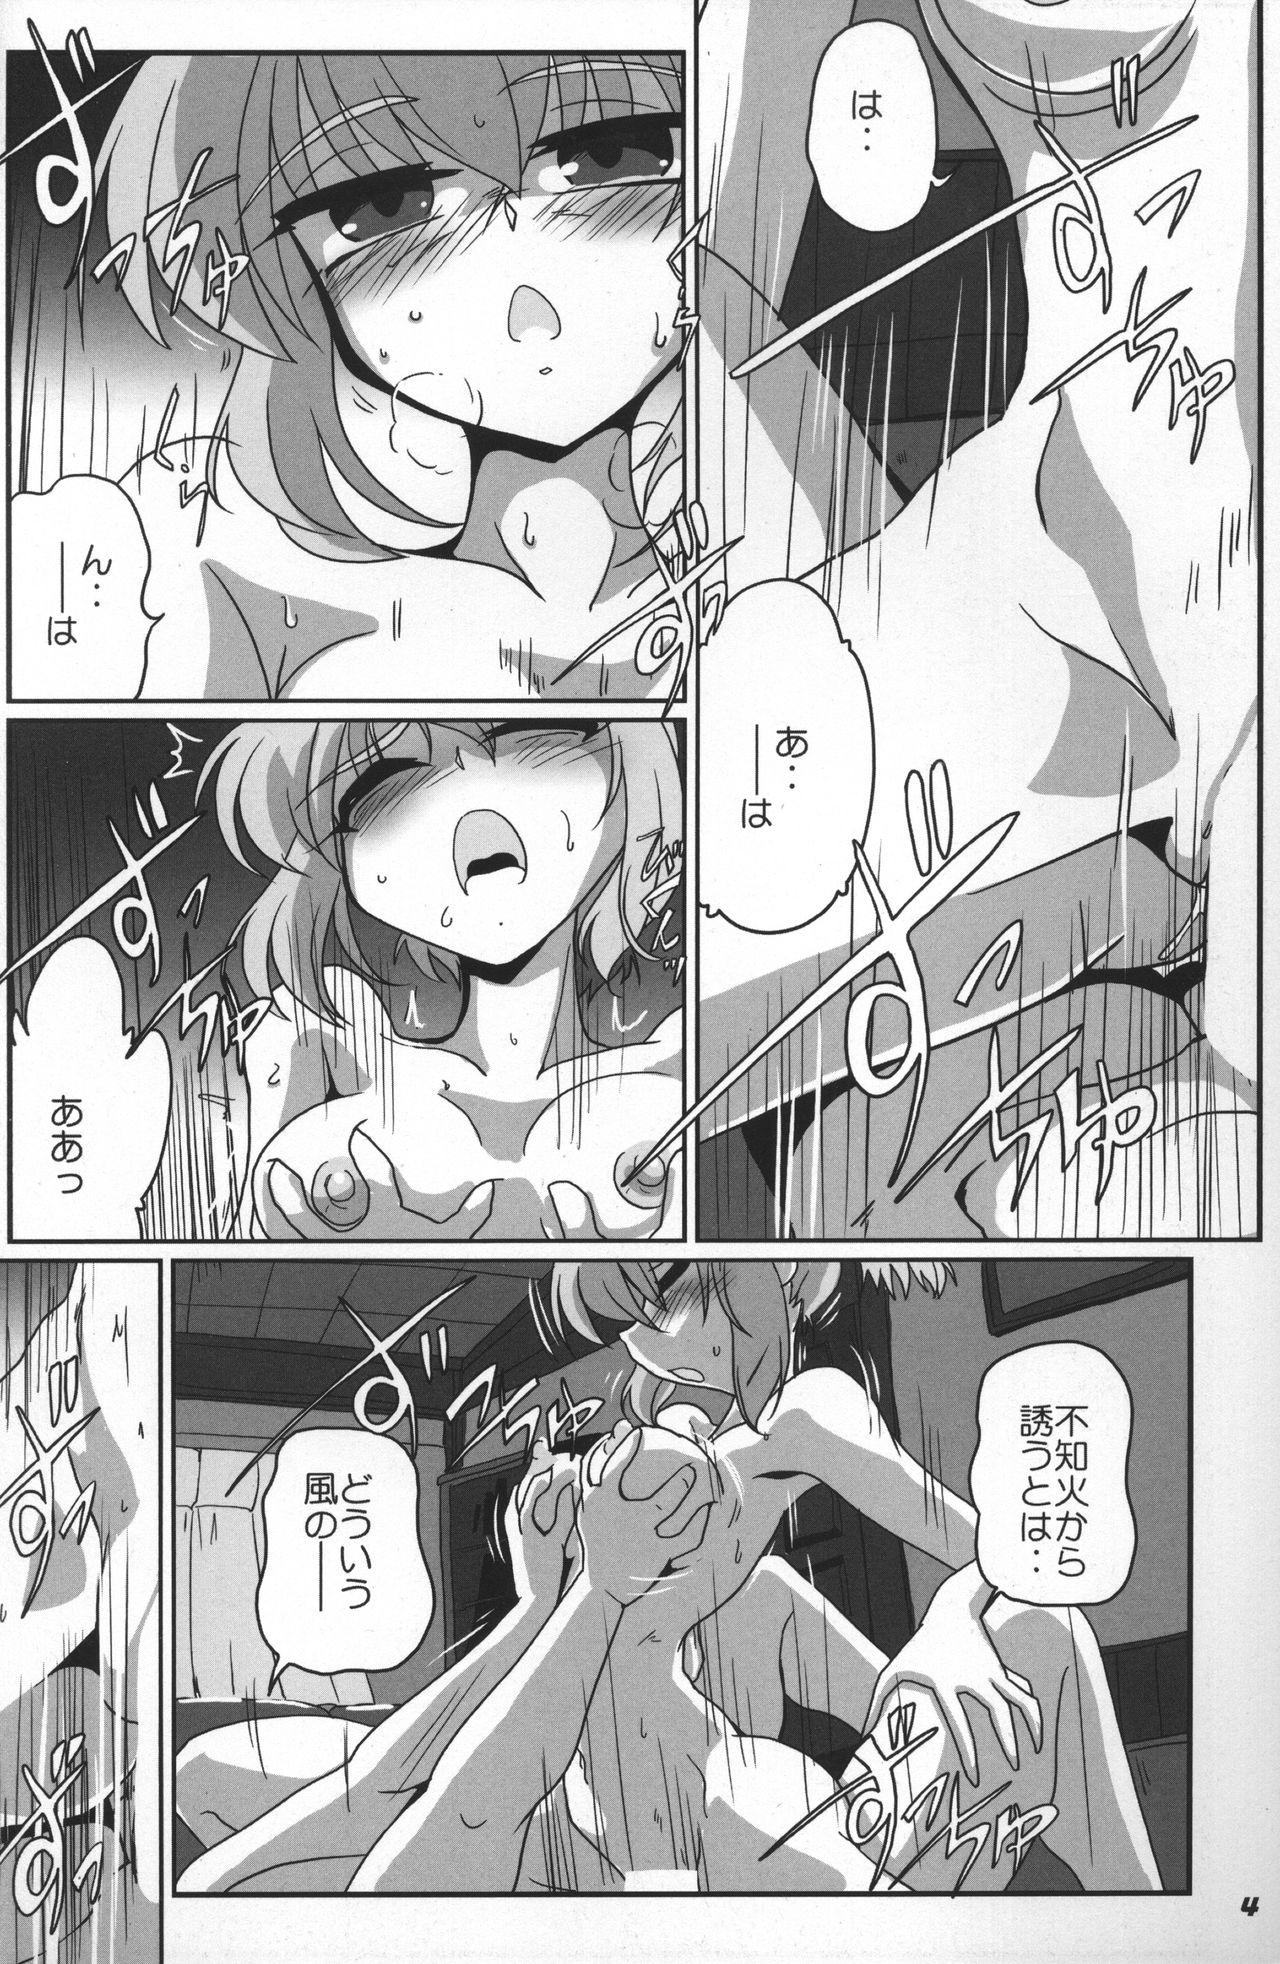 Groupsex KAN-COLLE N+ YAGGY kai - Kantai collection Family Taboo - Page 5